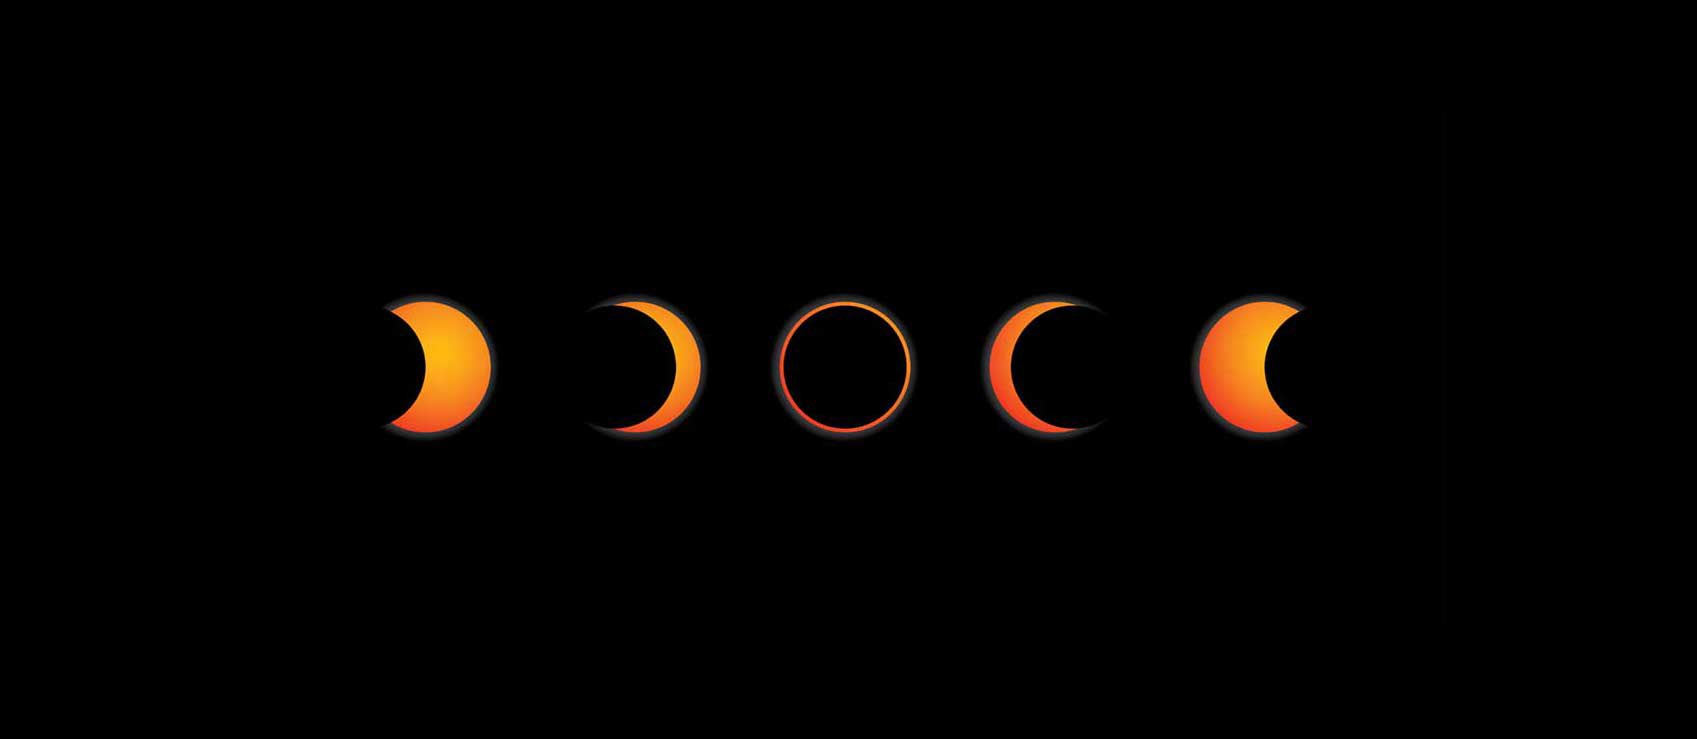 Stages of the moon leading towards the total solar eclipse featured in the middle, each moon phase is a type of eclipse that can be seen. Photo by Santafee.com.